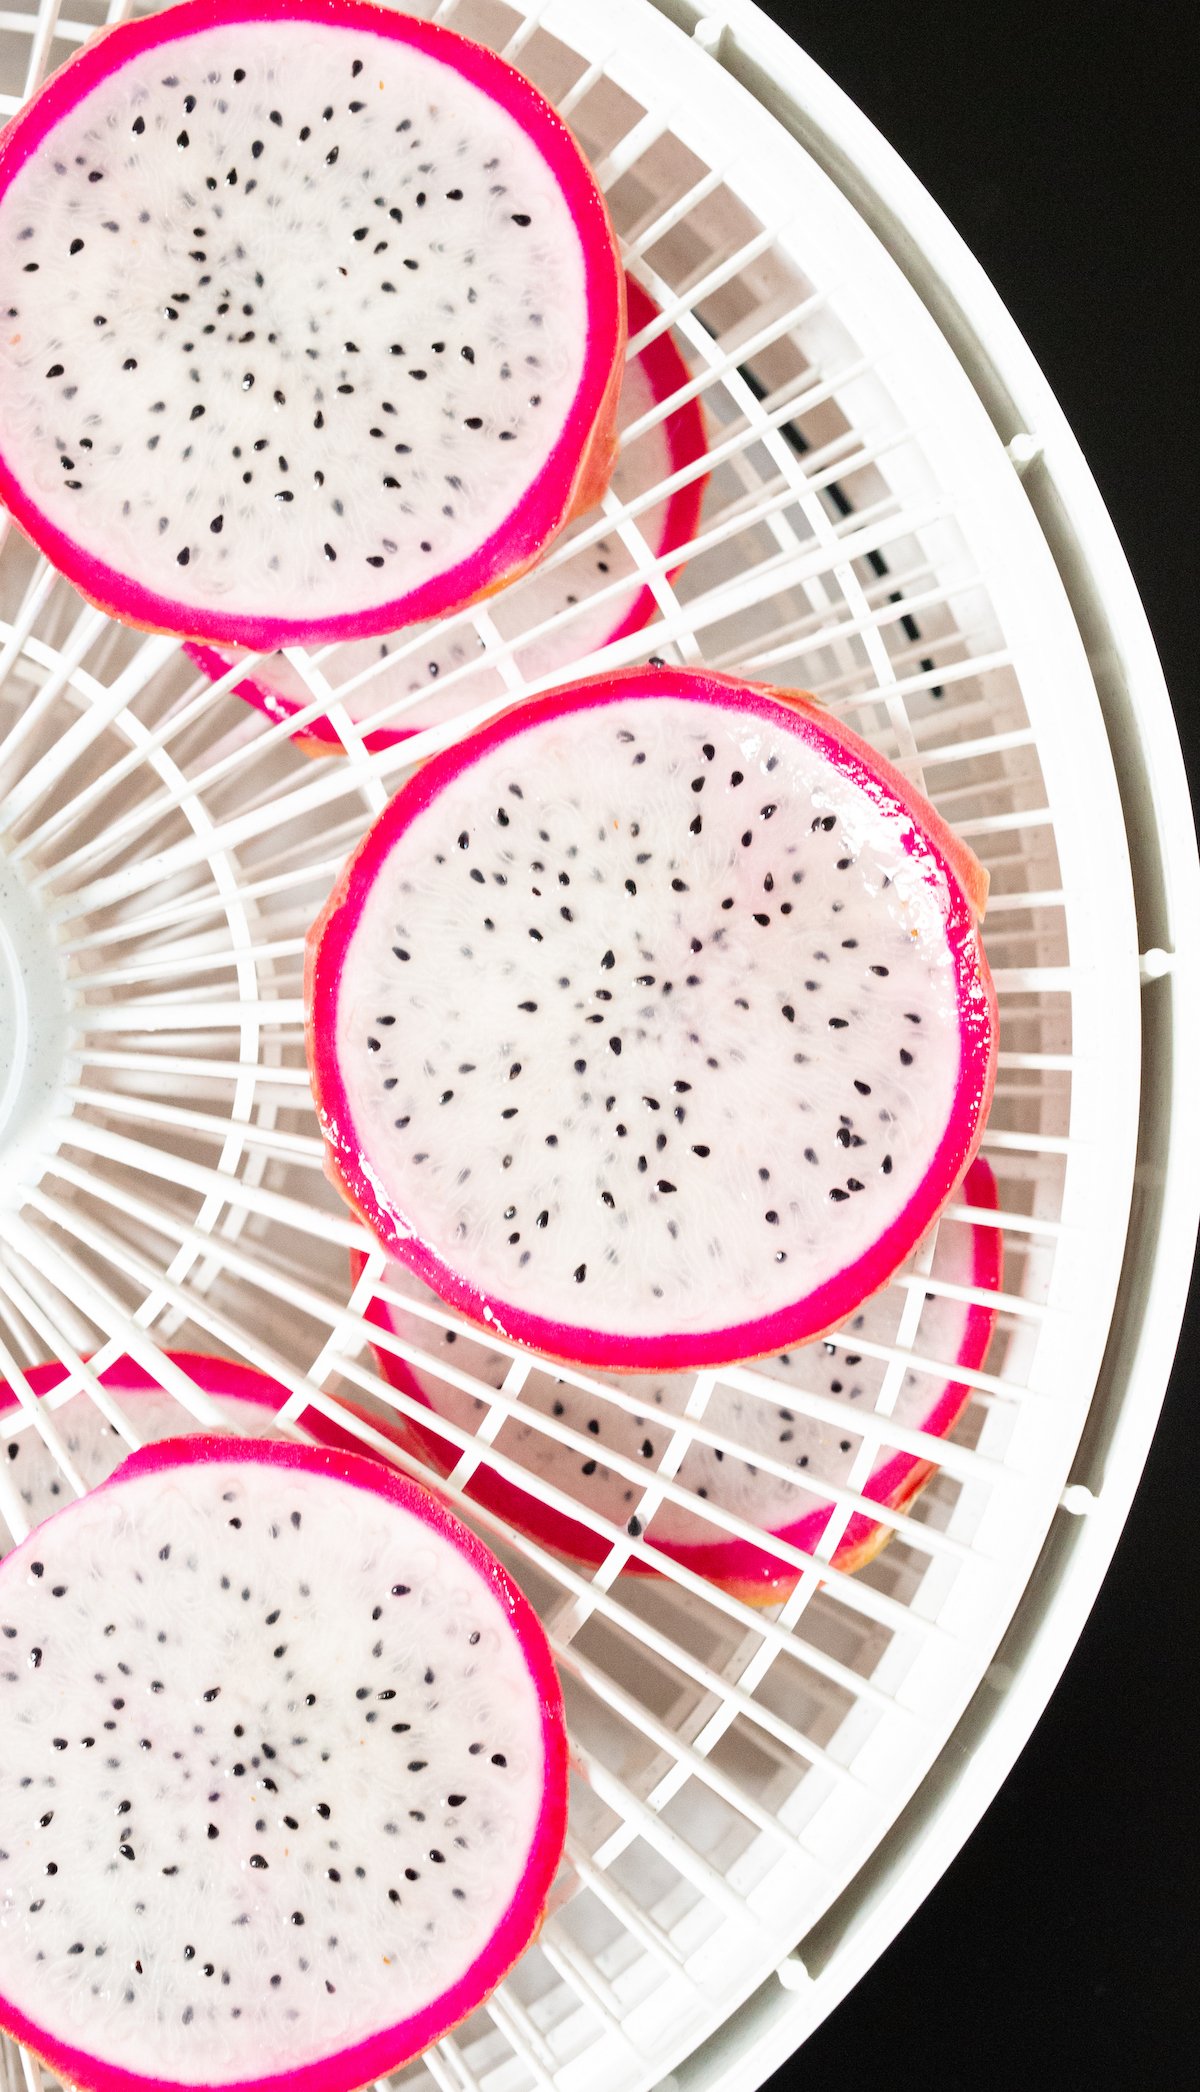 Dragonfruit slices with pink peel and white flesh laid out on dehydrator trays.